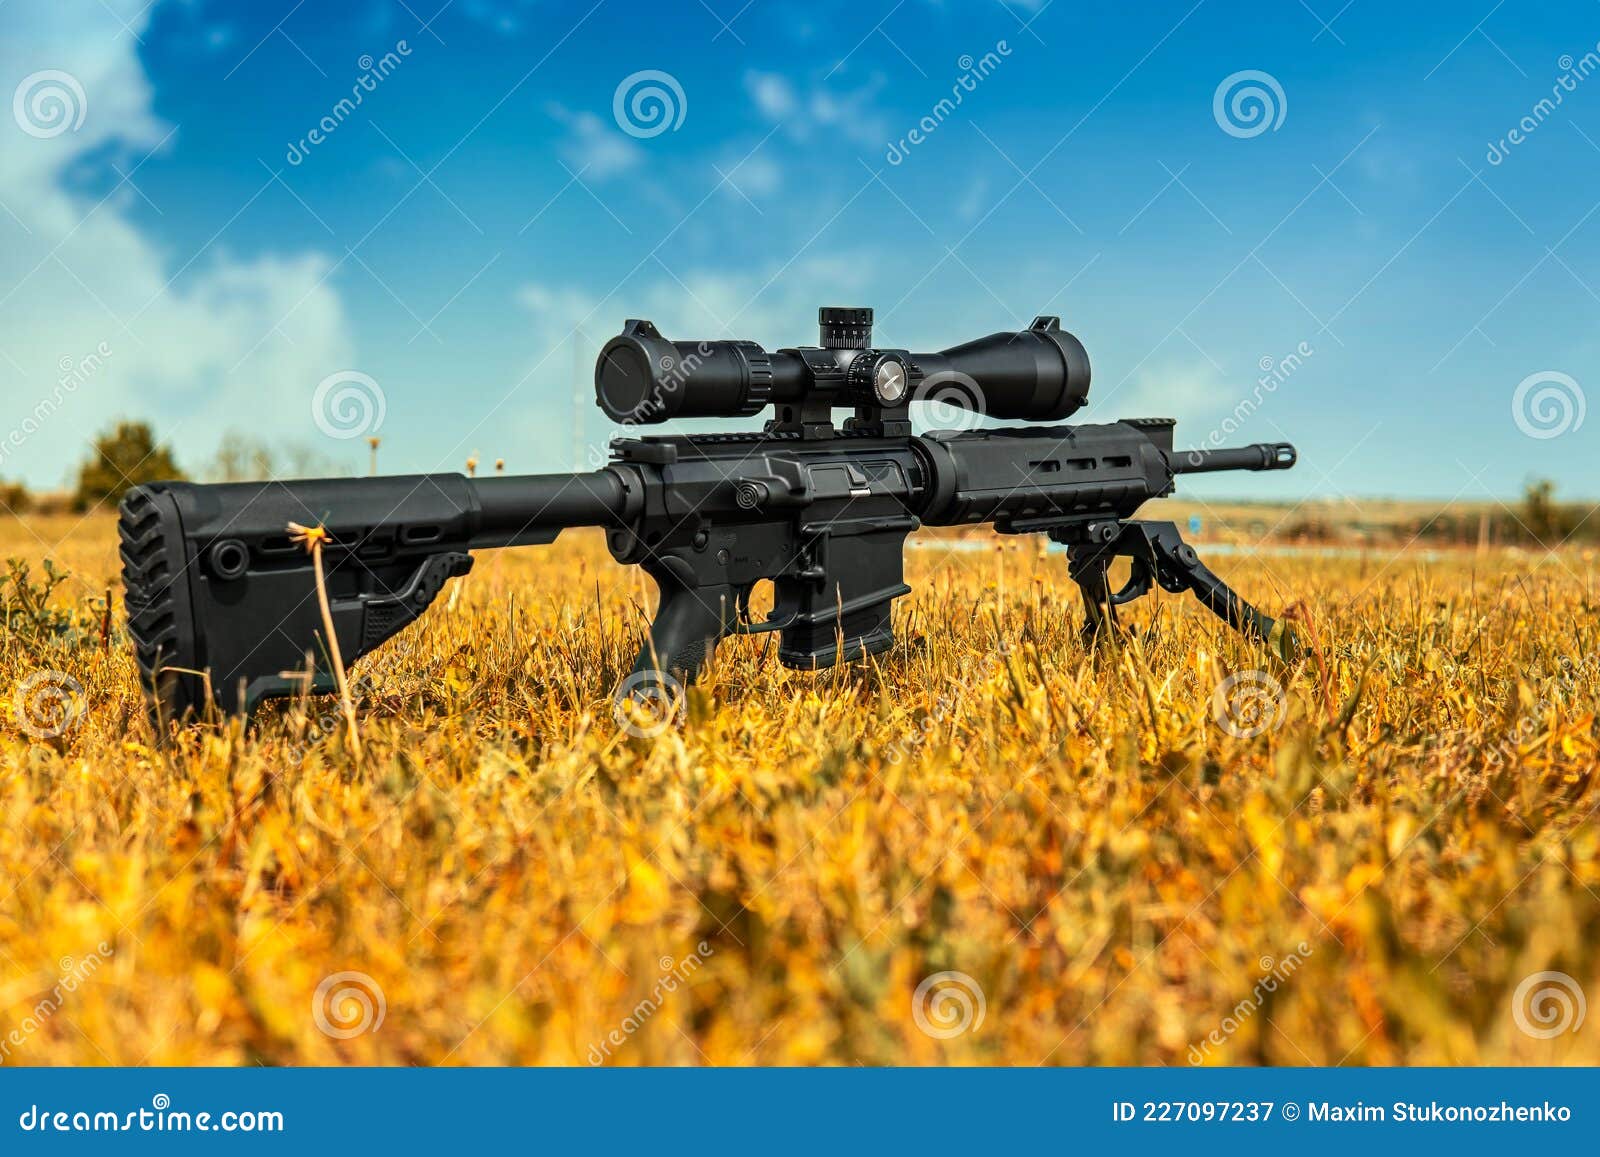 automatic carbine with a telescopic sight. a sniper weapon mounted on a bipod. gun for long-range aimed shooting